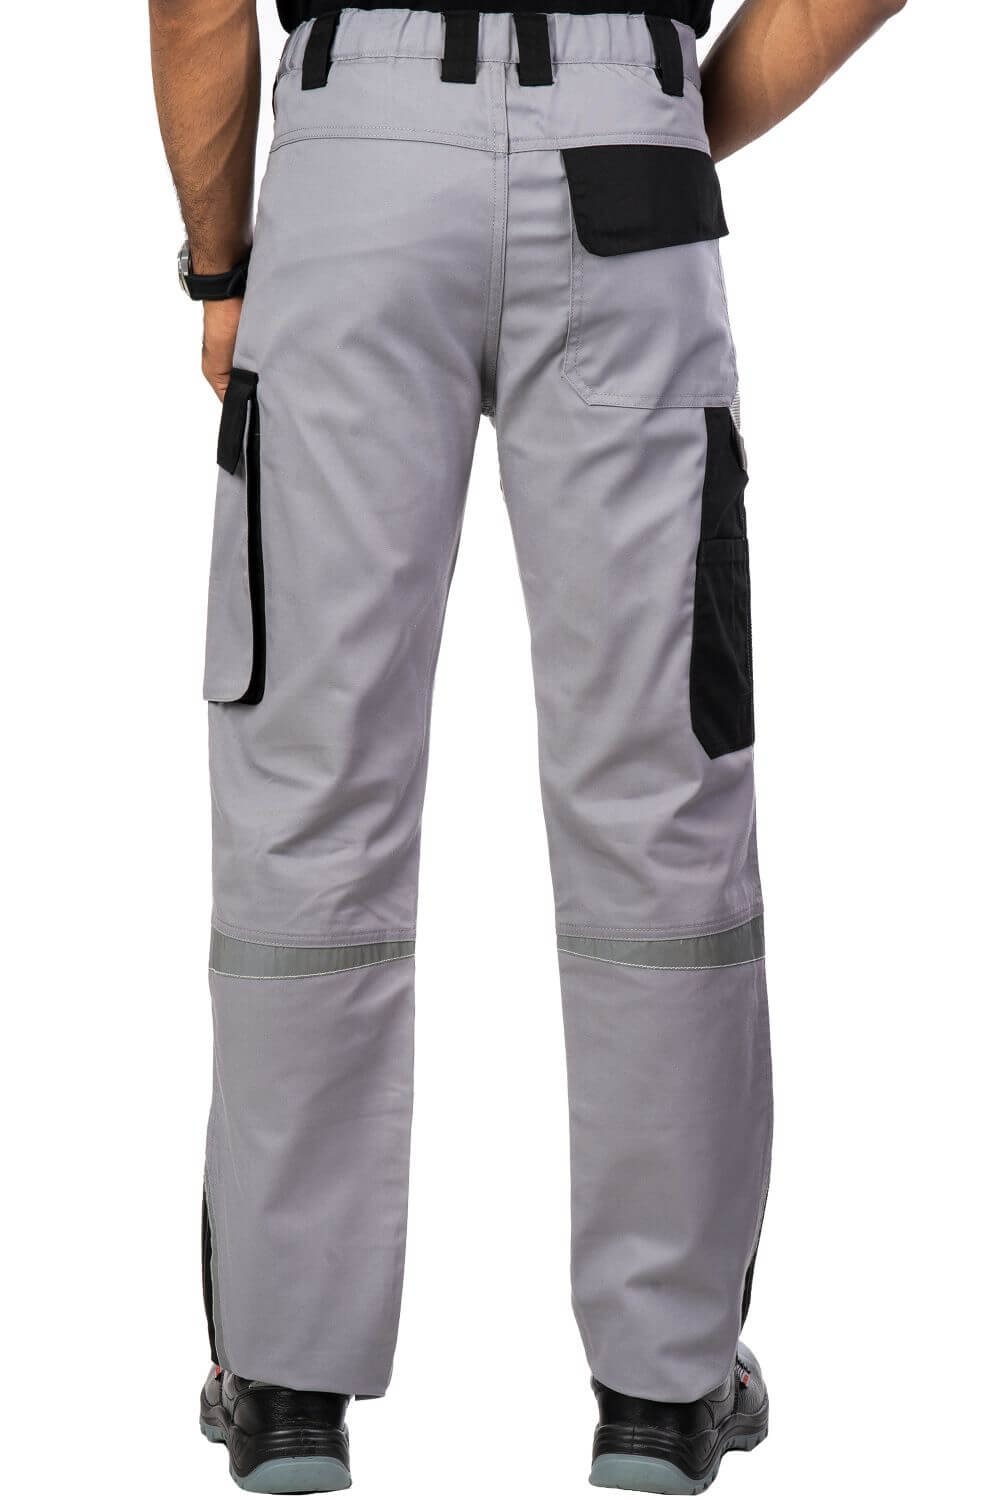 New-age industrial design trousers specifically engineered for user comfort and diversified usage.